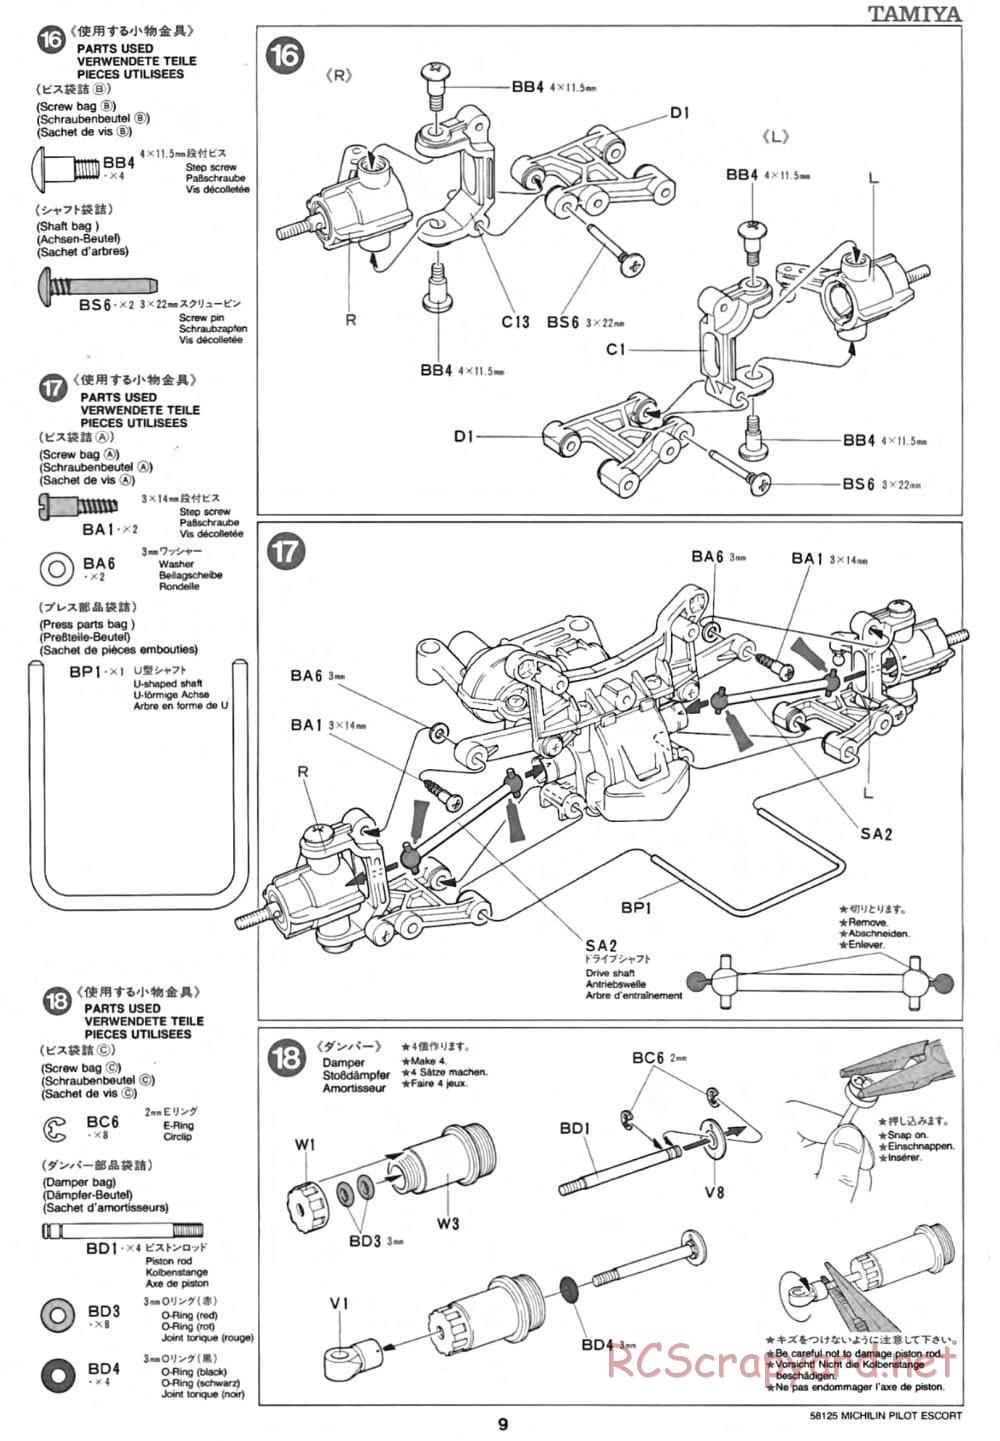 Tamiya - Michelin Pilot Ford Escort RS Cosworth - TA-01 Chassis - Manual - Page 9